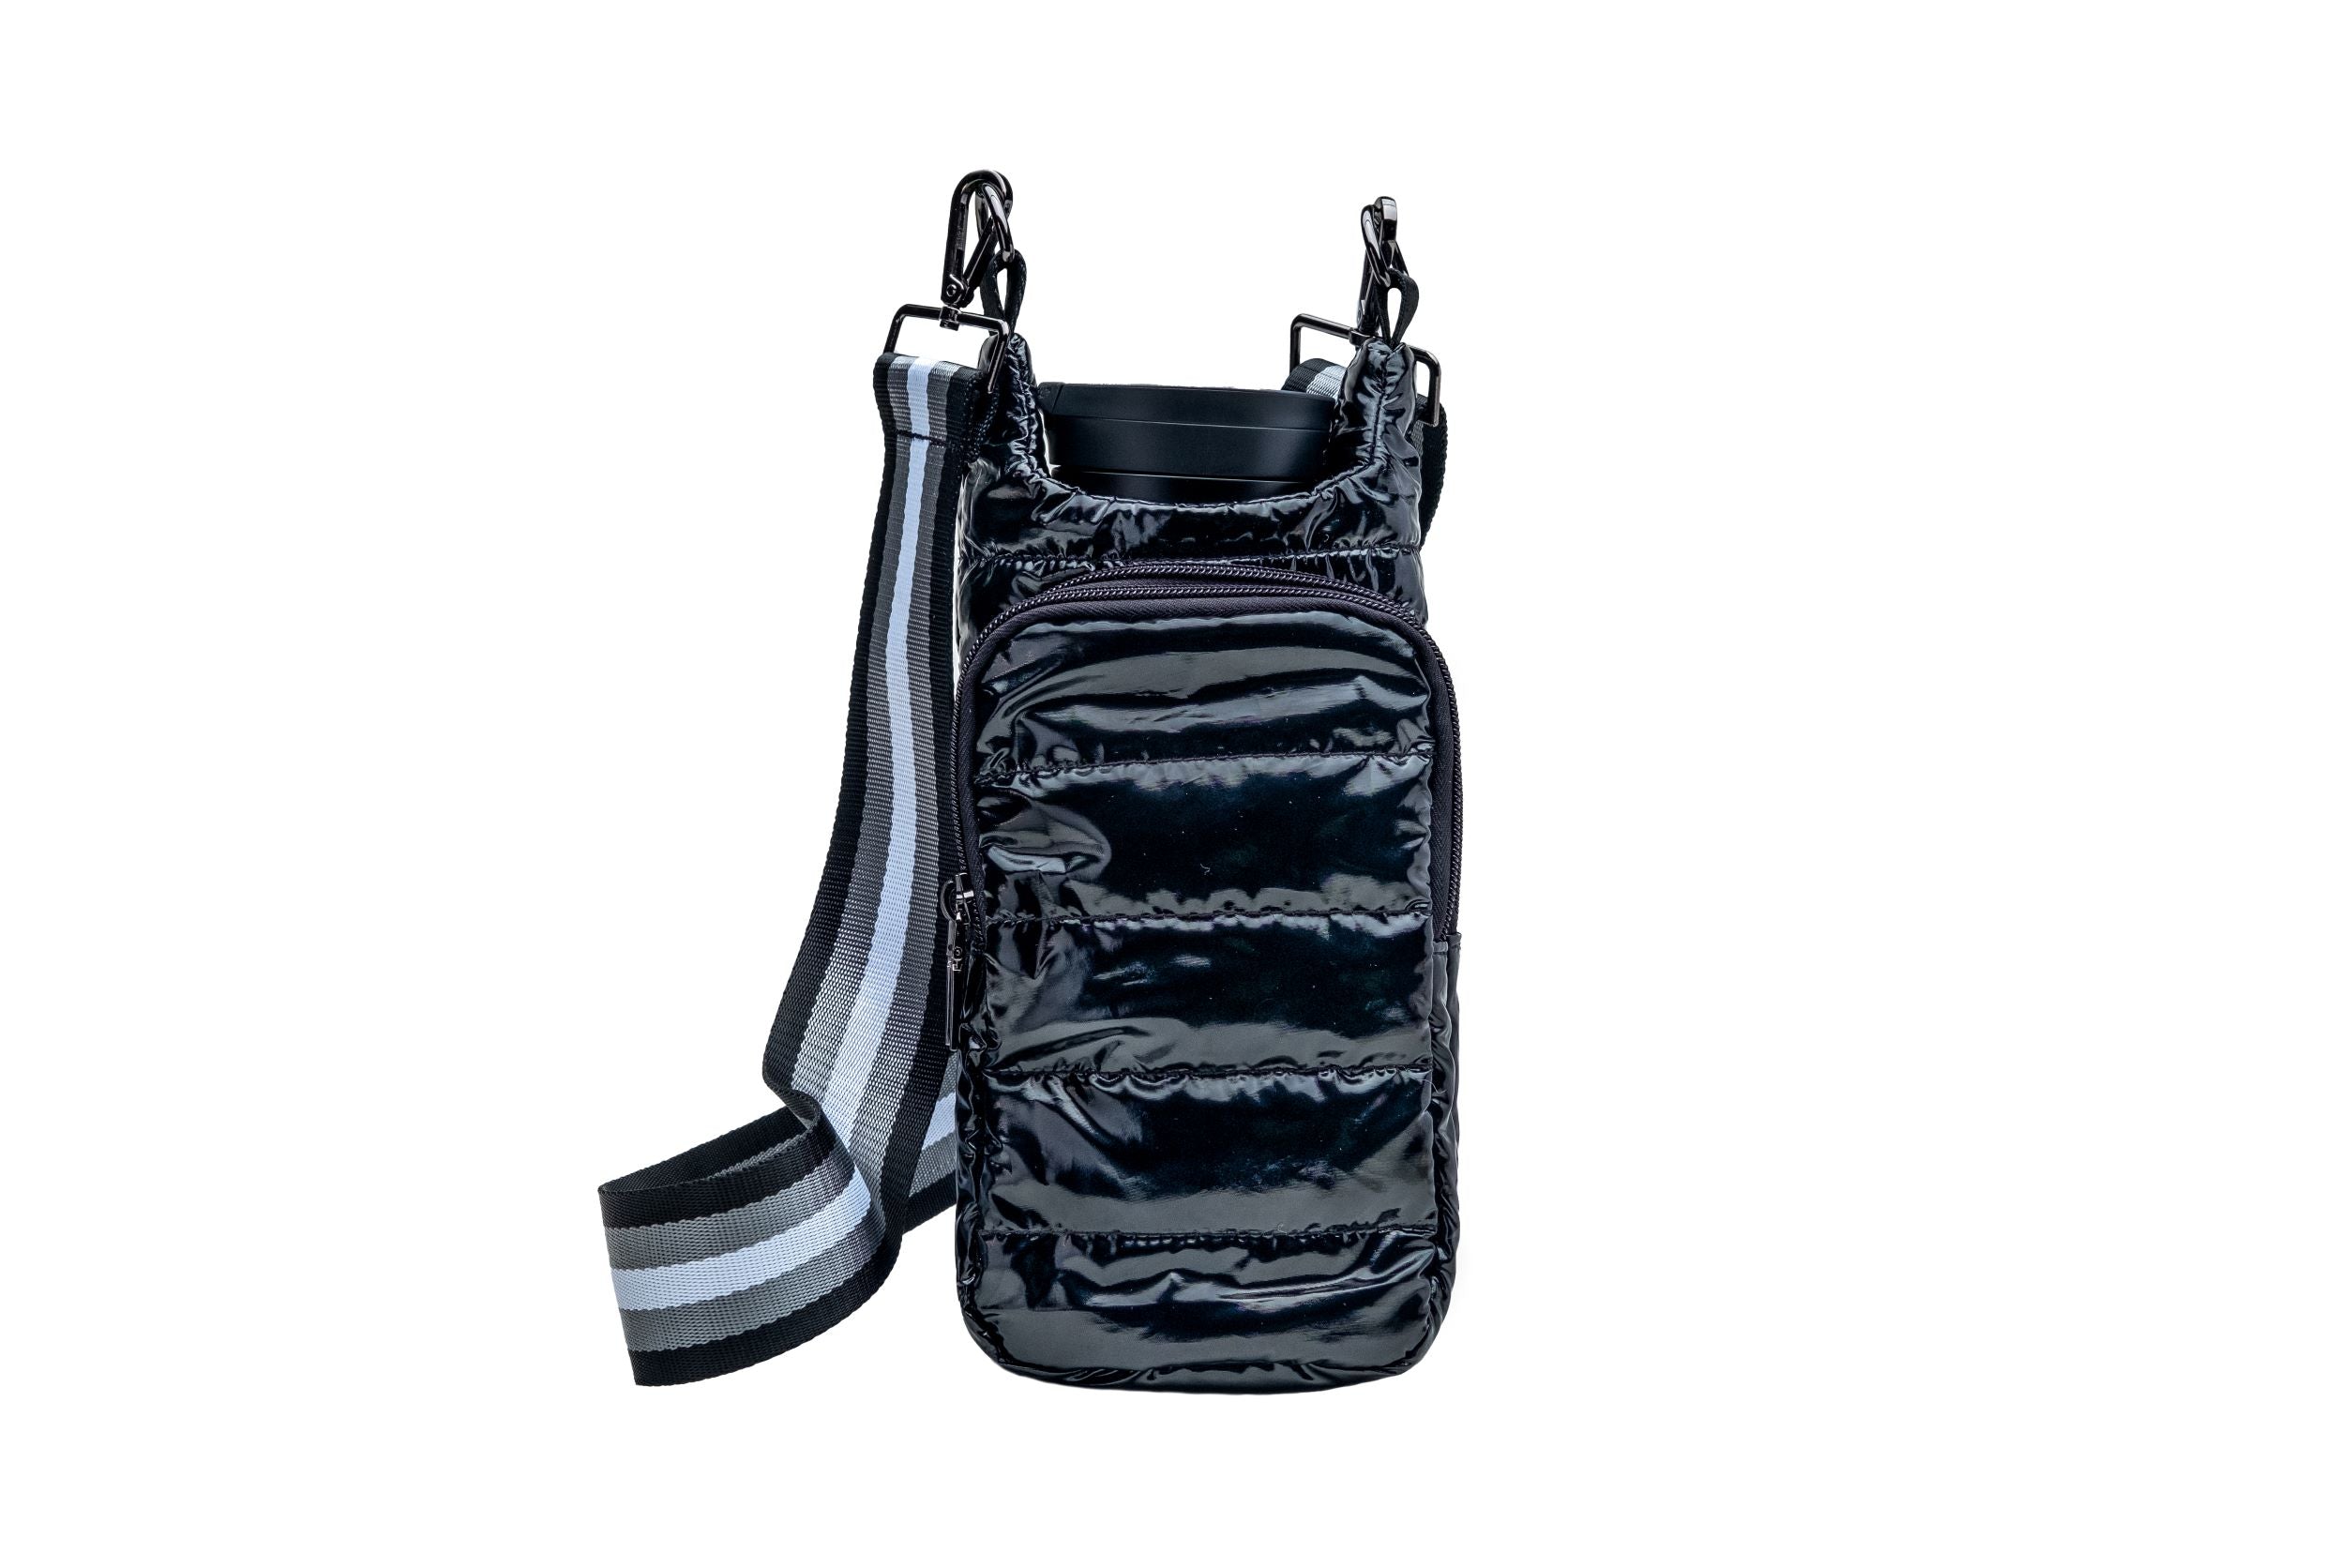 Wholesale - Black Glossy HydroBag with Gray/Black/White Strap